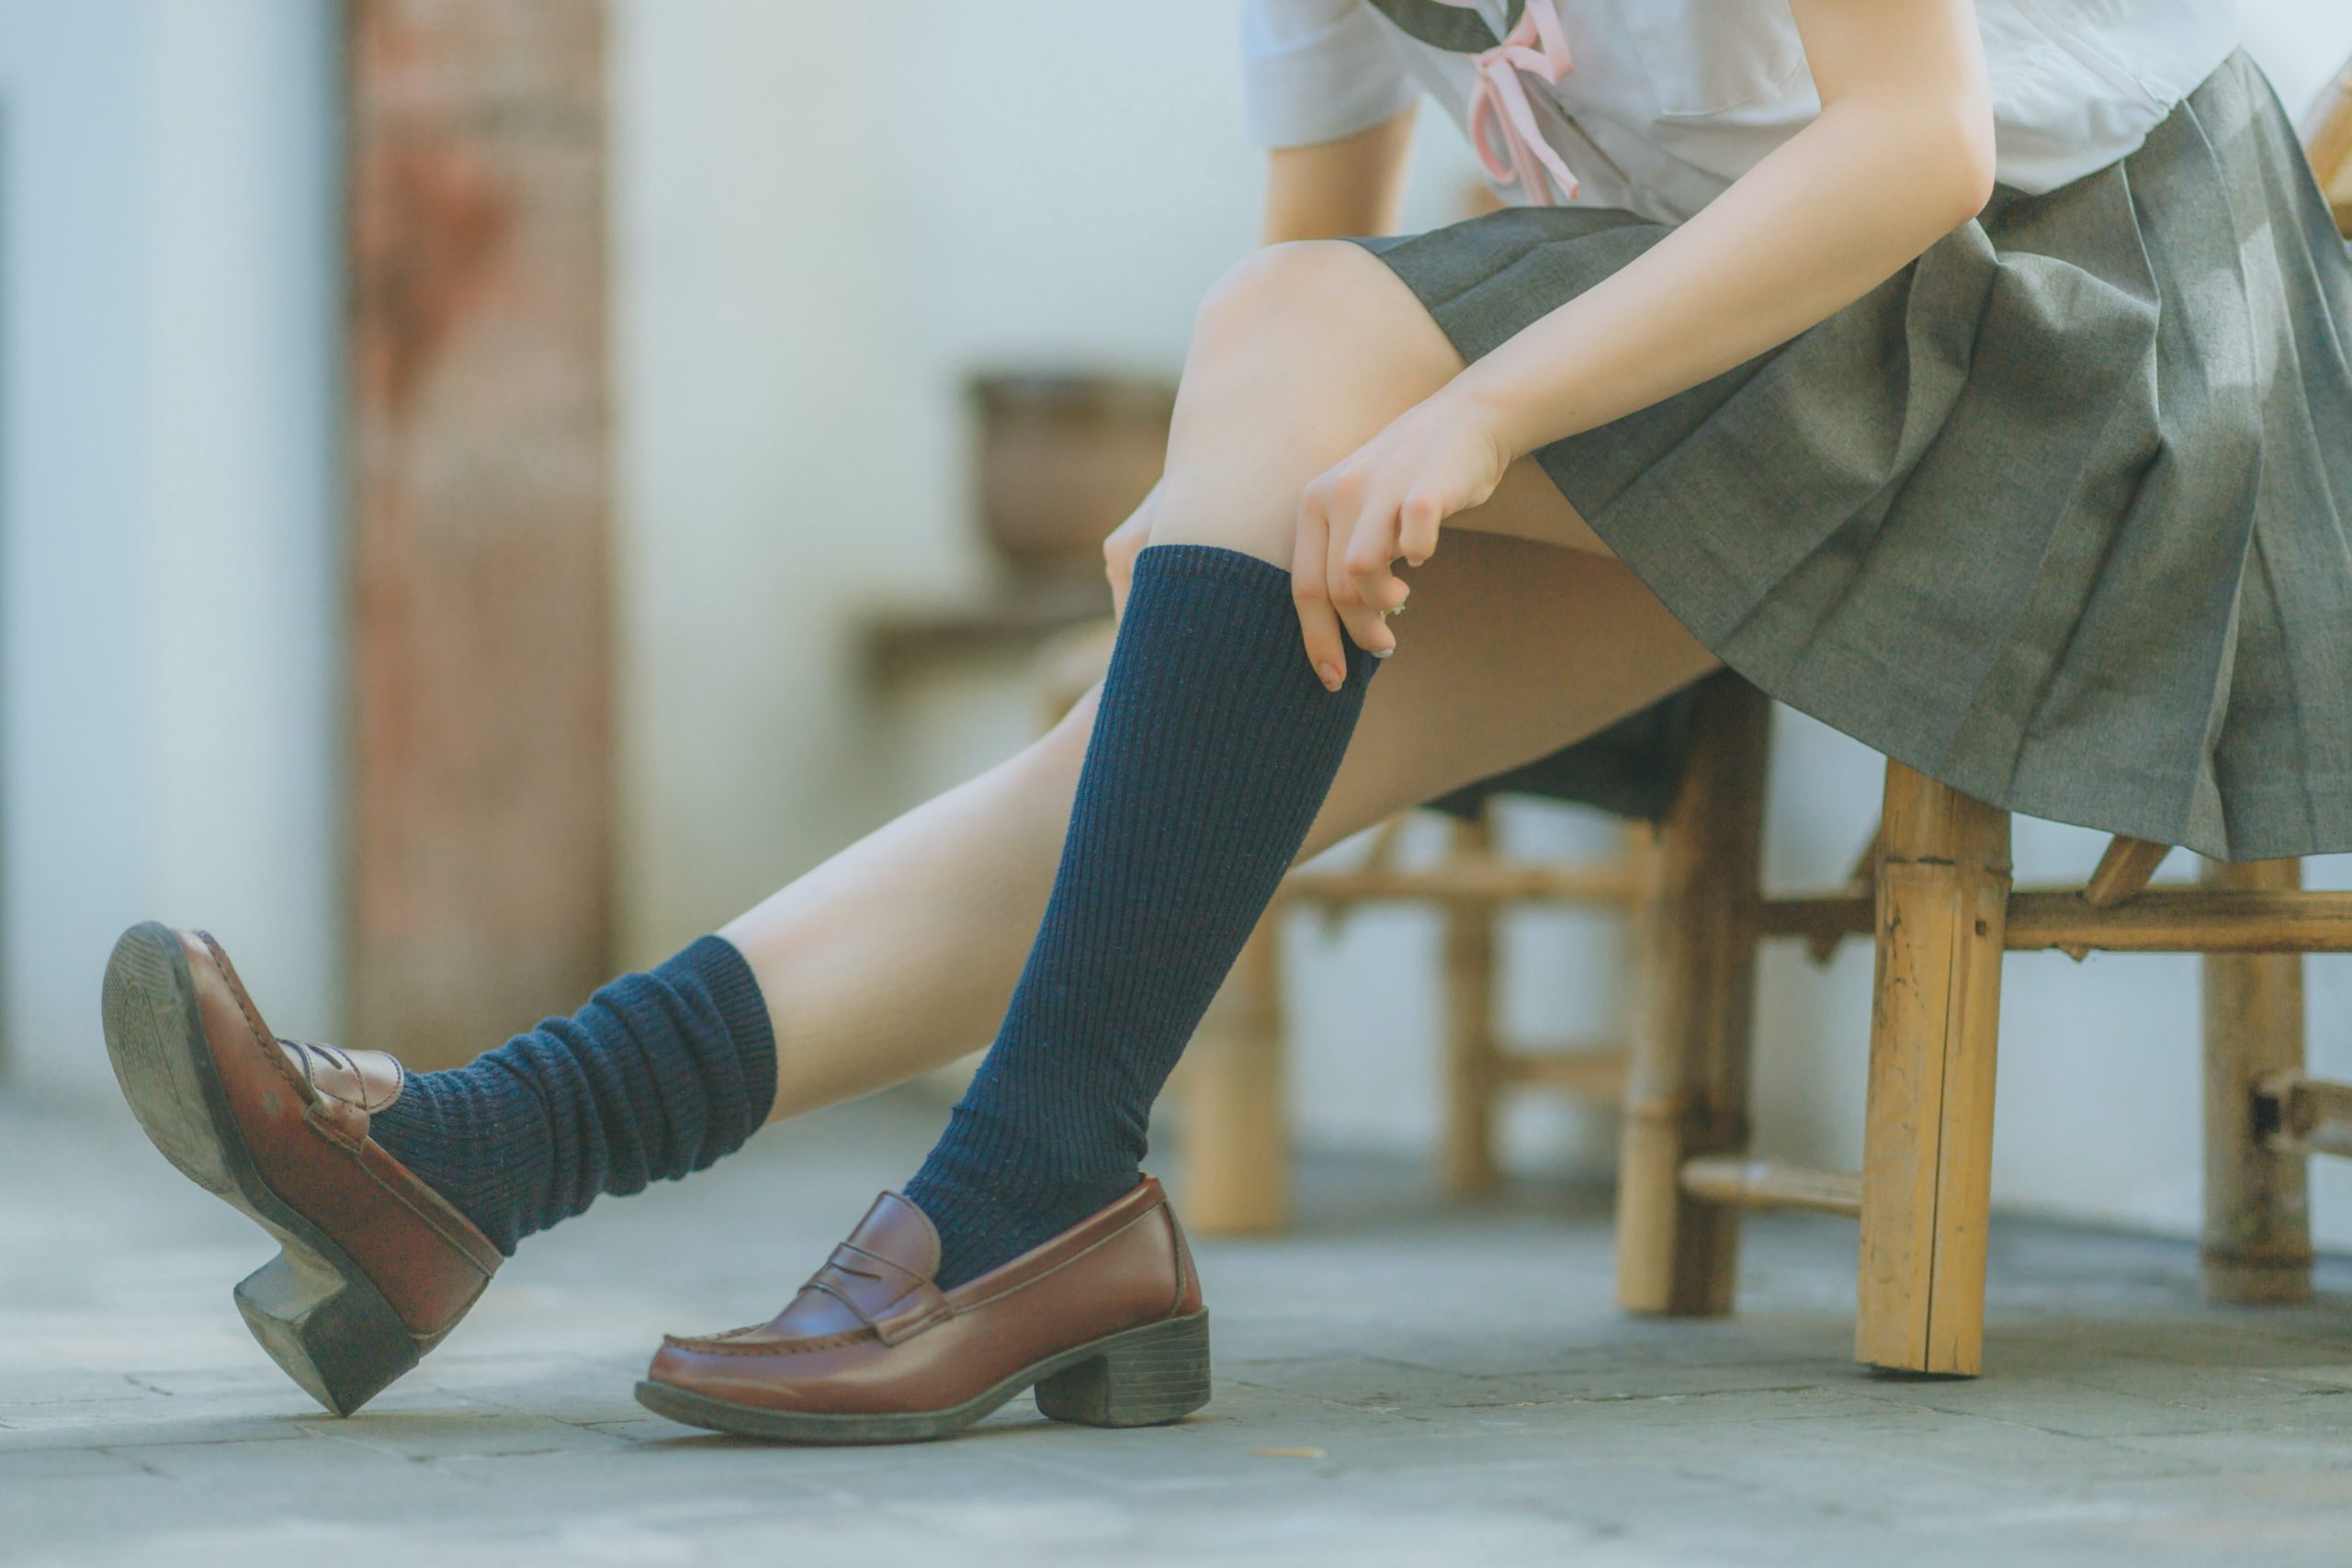 What Do Compression Socks Do? Understanding the Benefits and Uses